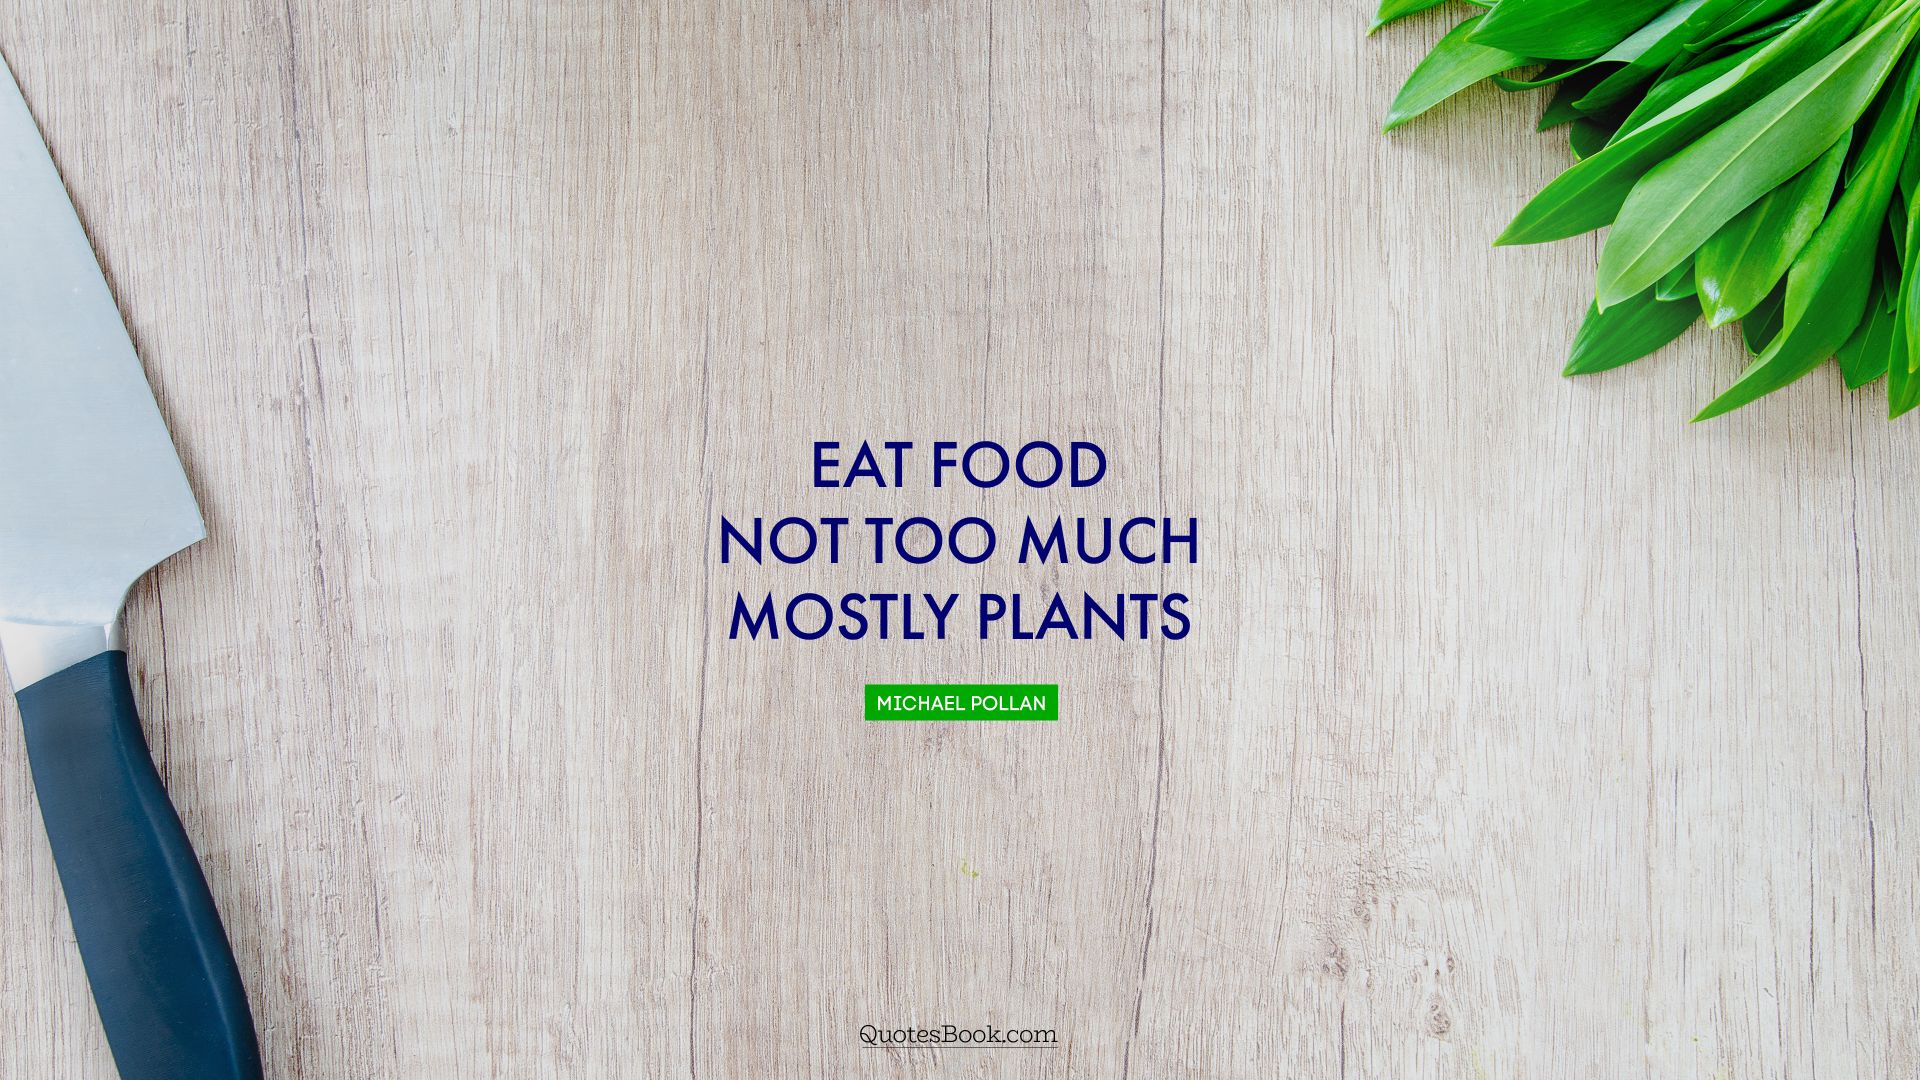 Eat food. Not too much. Mostly plants. - Quote by Michael Pollan